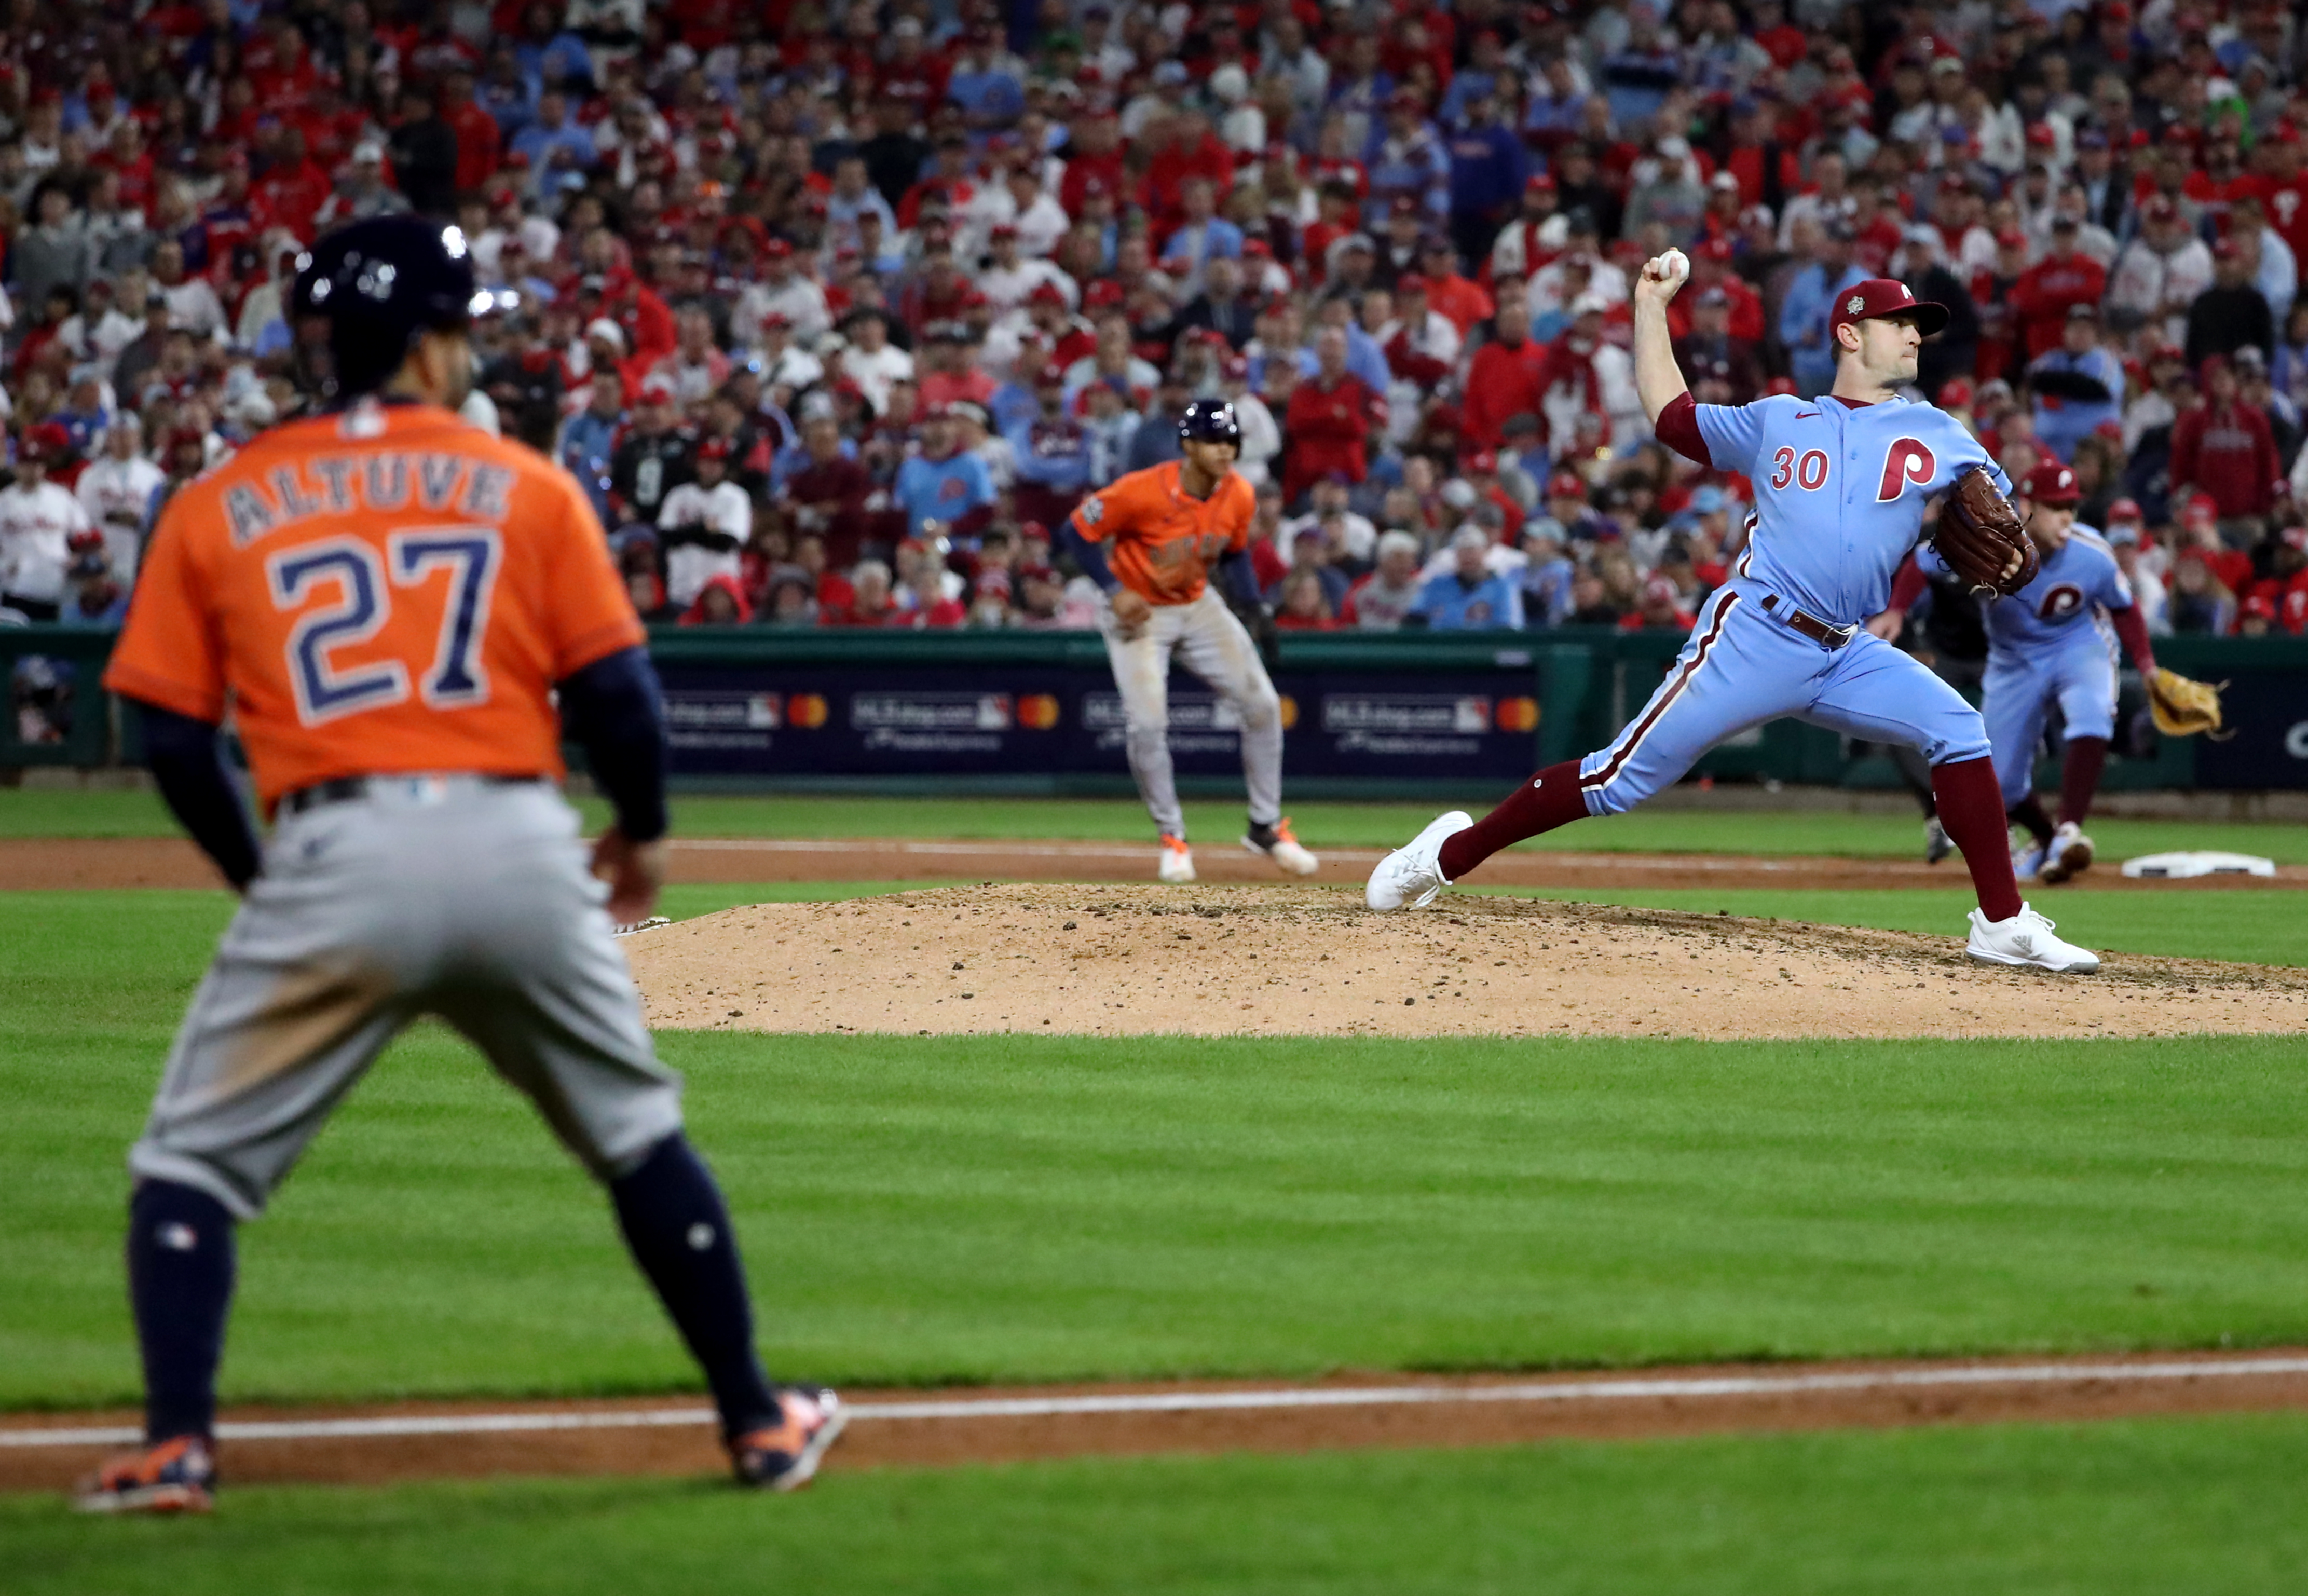 Astros vs. Phillies: World Series Game 6 TV channel, live stream